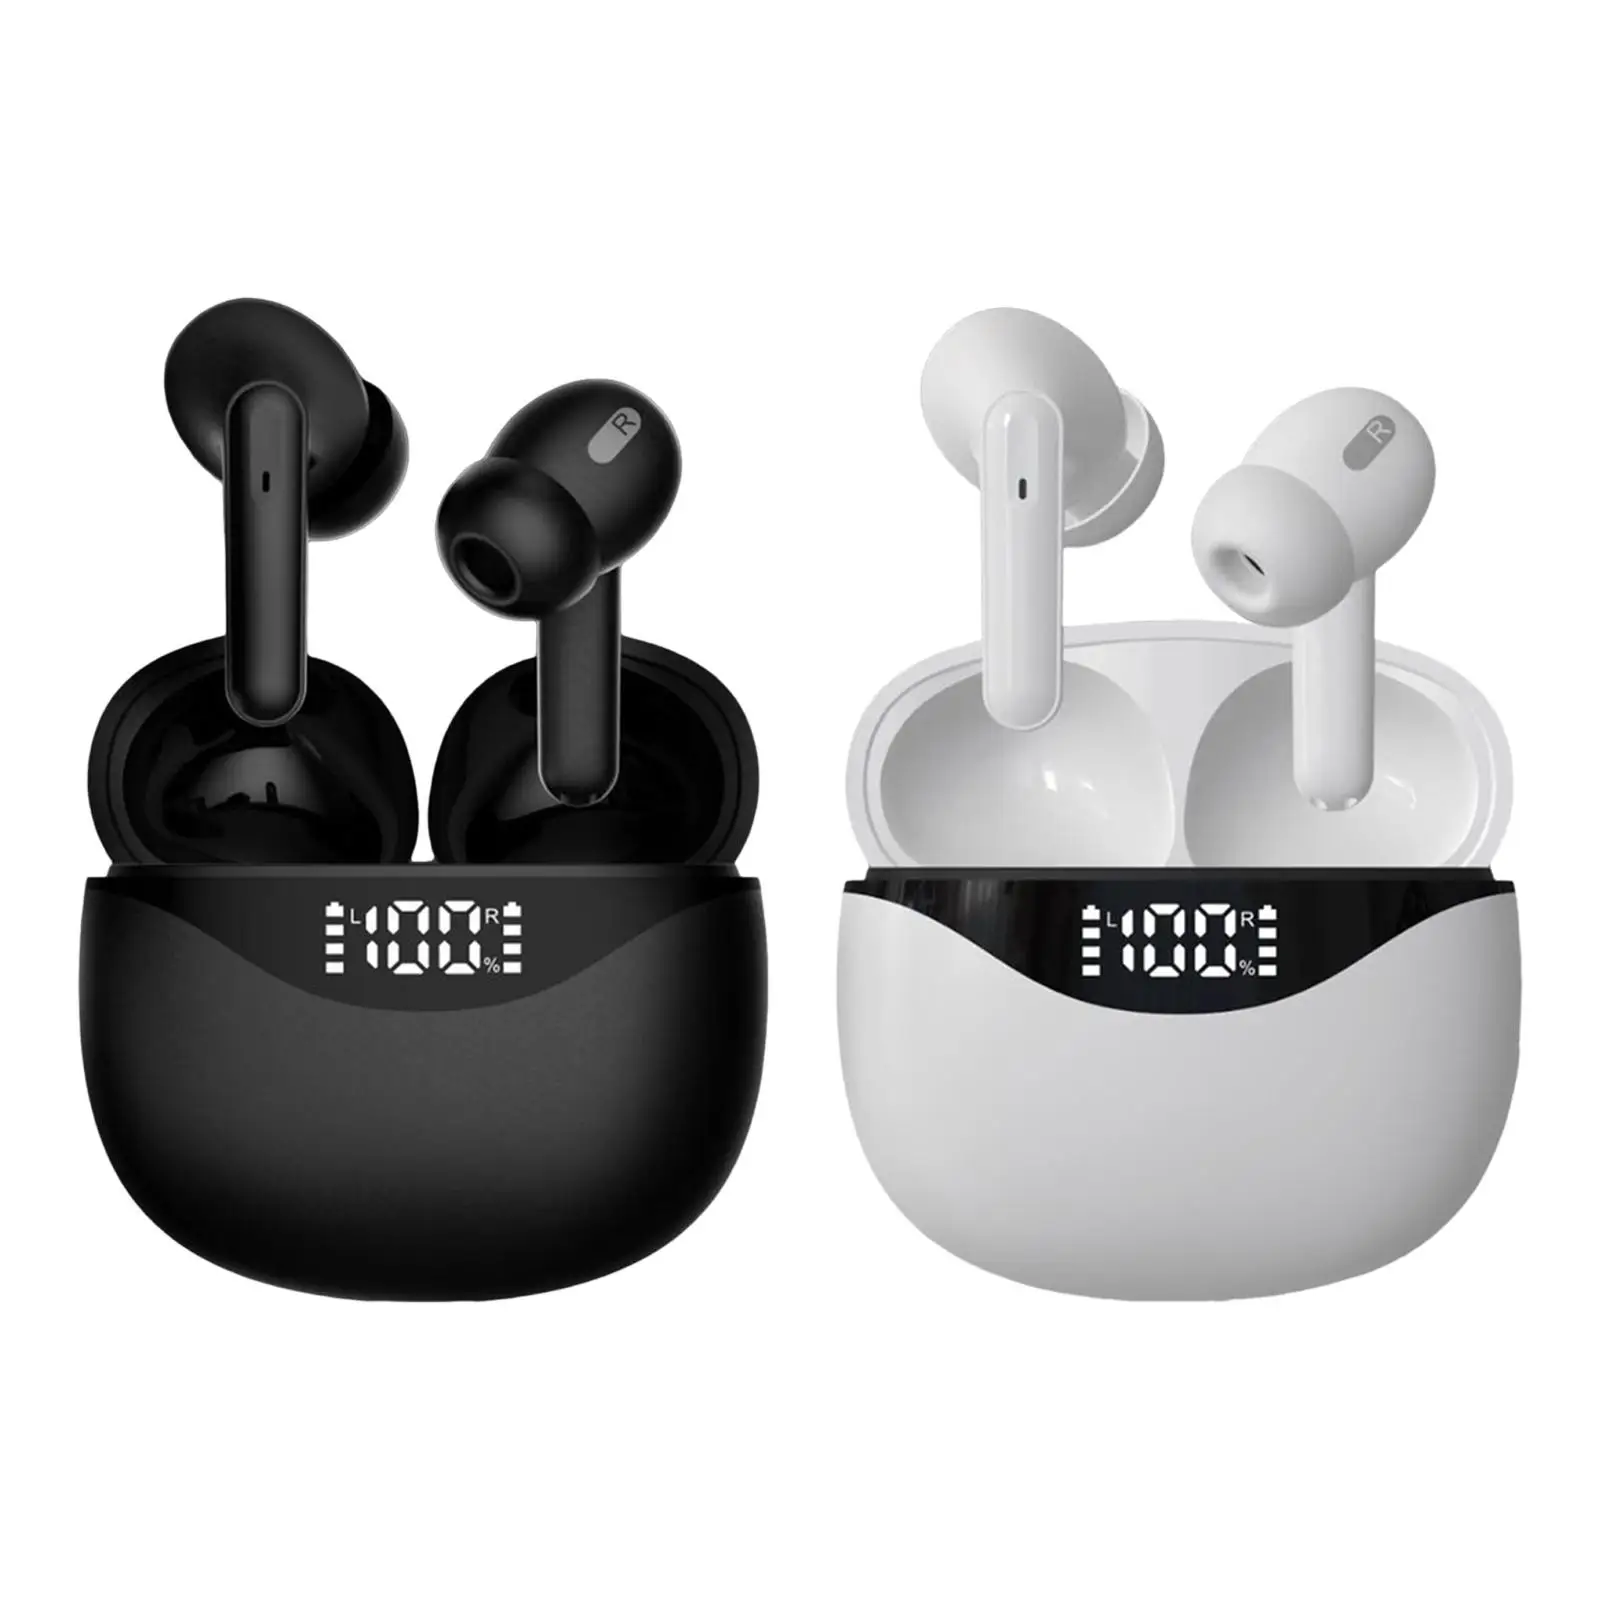 Bluetooth Headsets Waterproof HiFi HiFi Sound with LED Battery Display Earphone for Running Sports